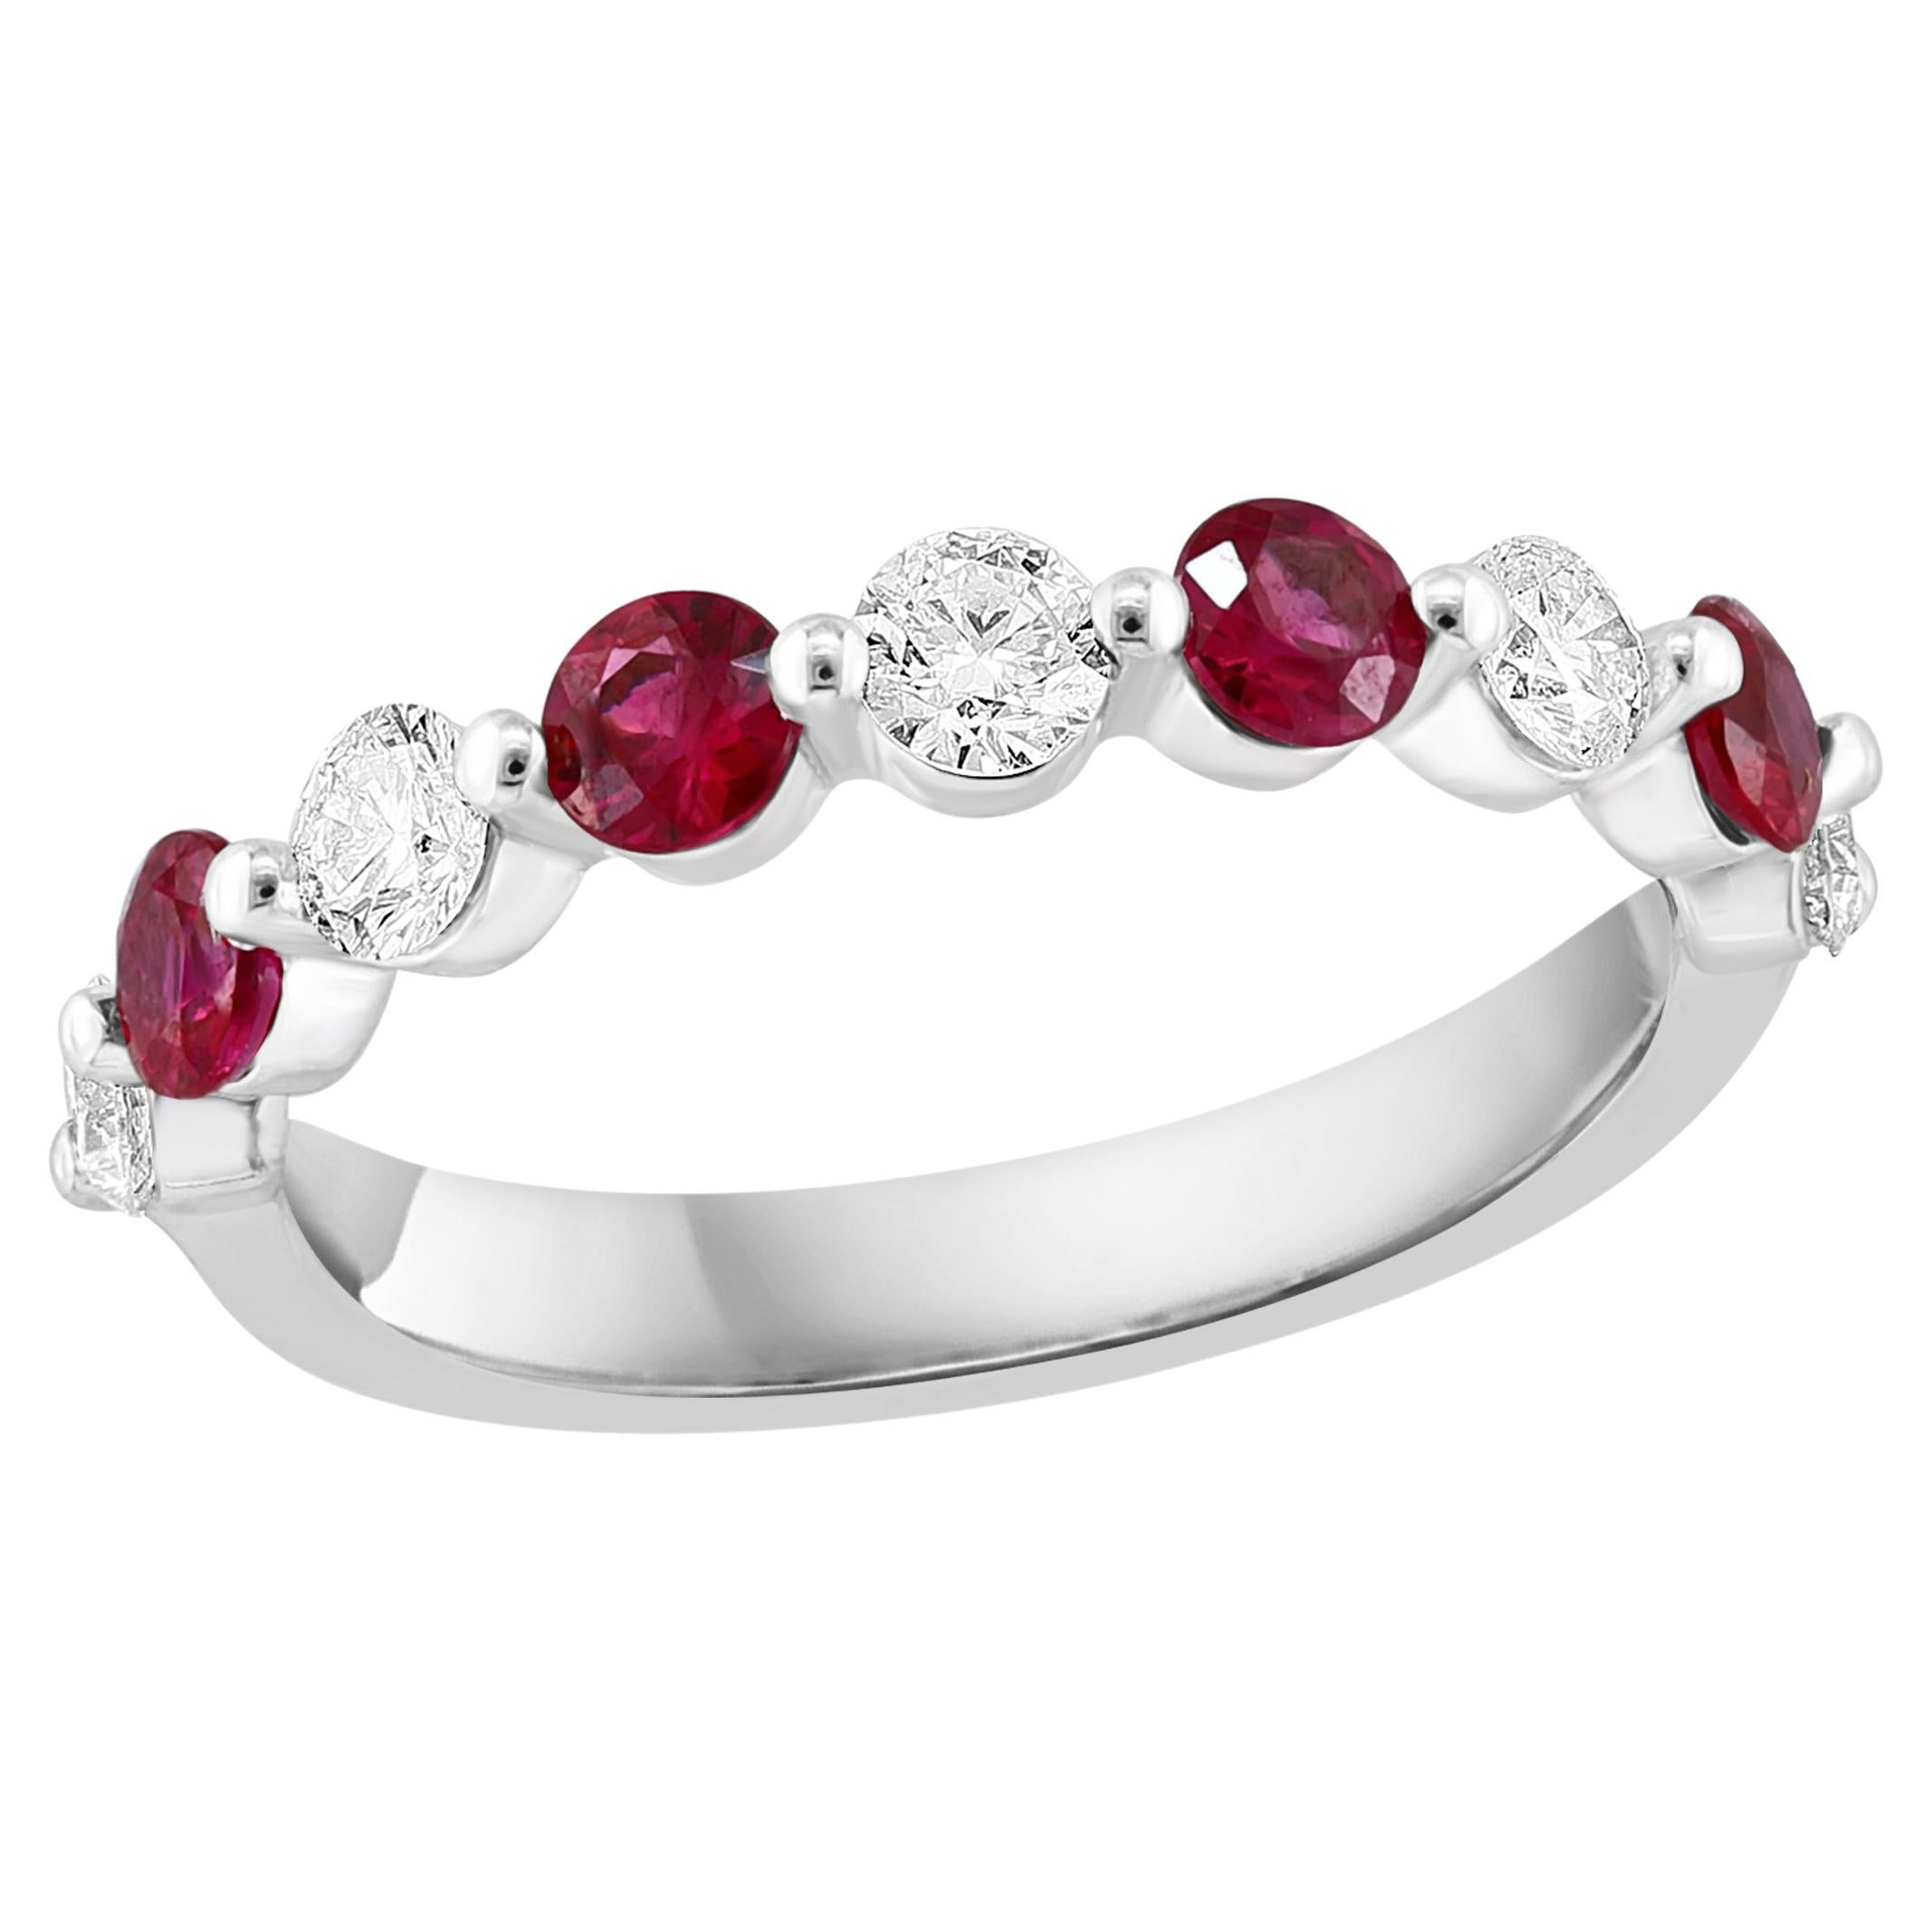 0.62 Carat Brilliant cut Ruby and Diamond 9 stone Wedding Band in 14K White Gold For Sale